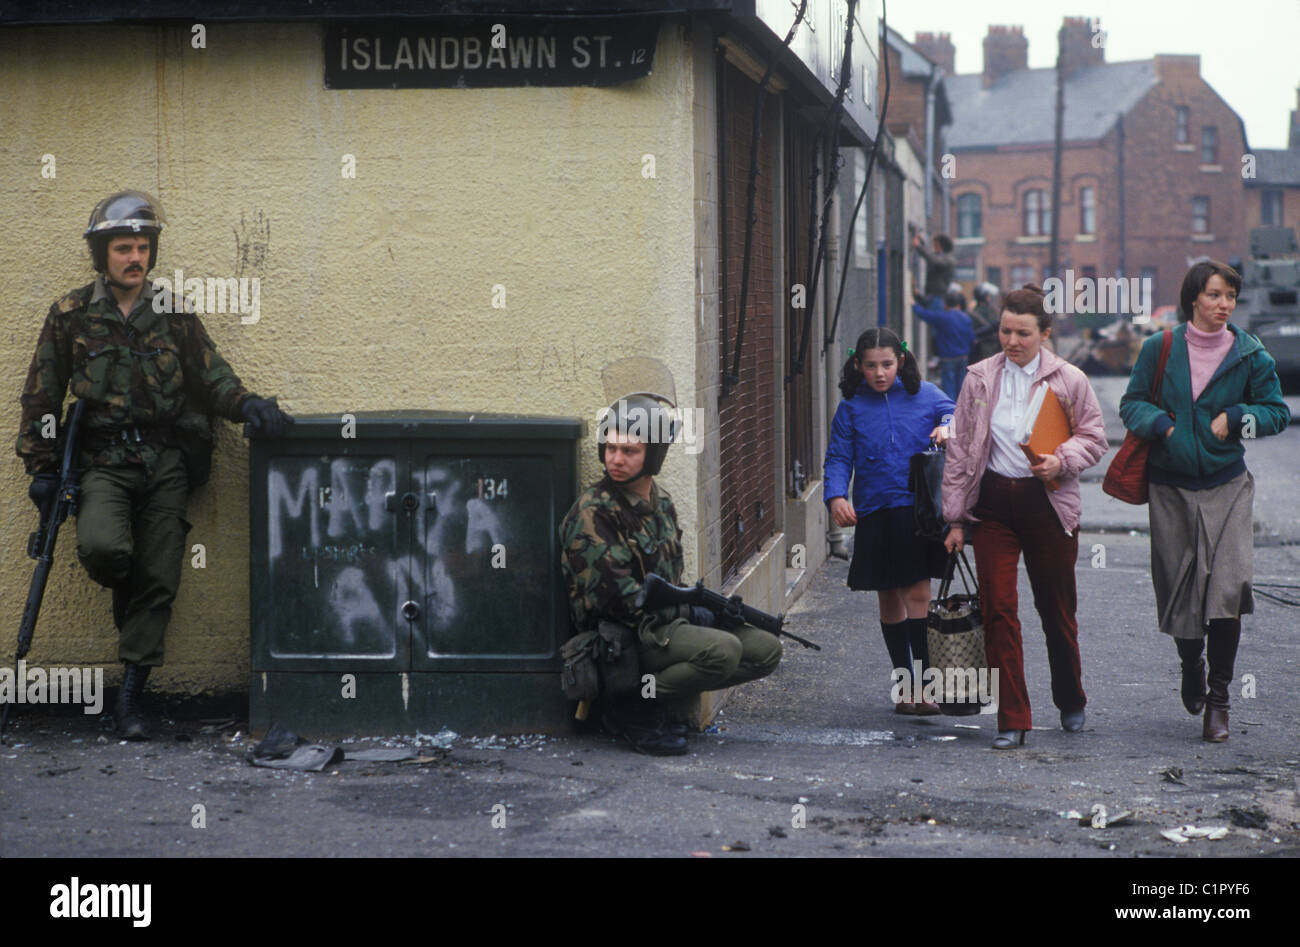 Belfast The Troubles 1980s. Islandbawn Street, Falls Road Belfast British soldiers. 1981 People there daily life  UK HOMER SYKES Stock Photo